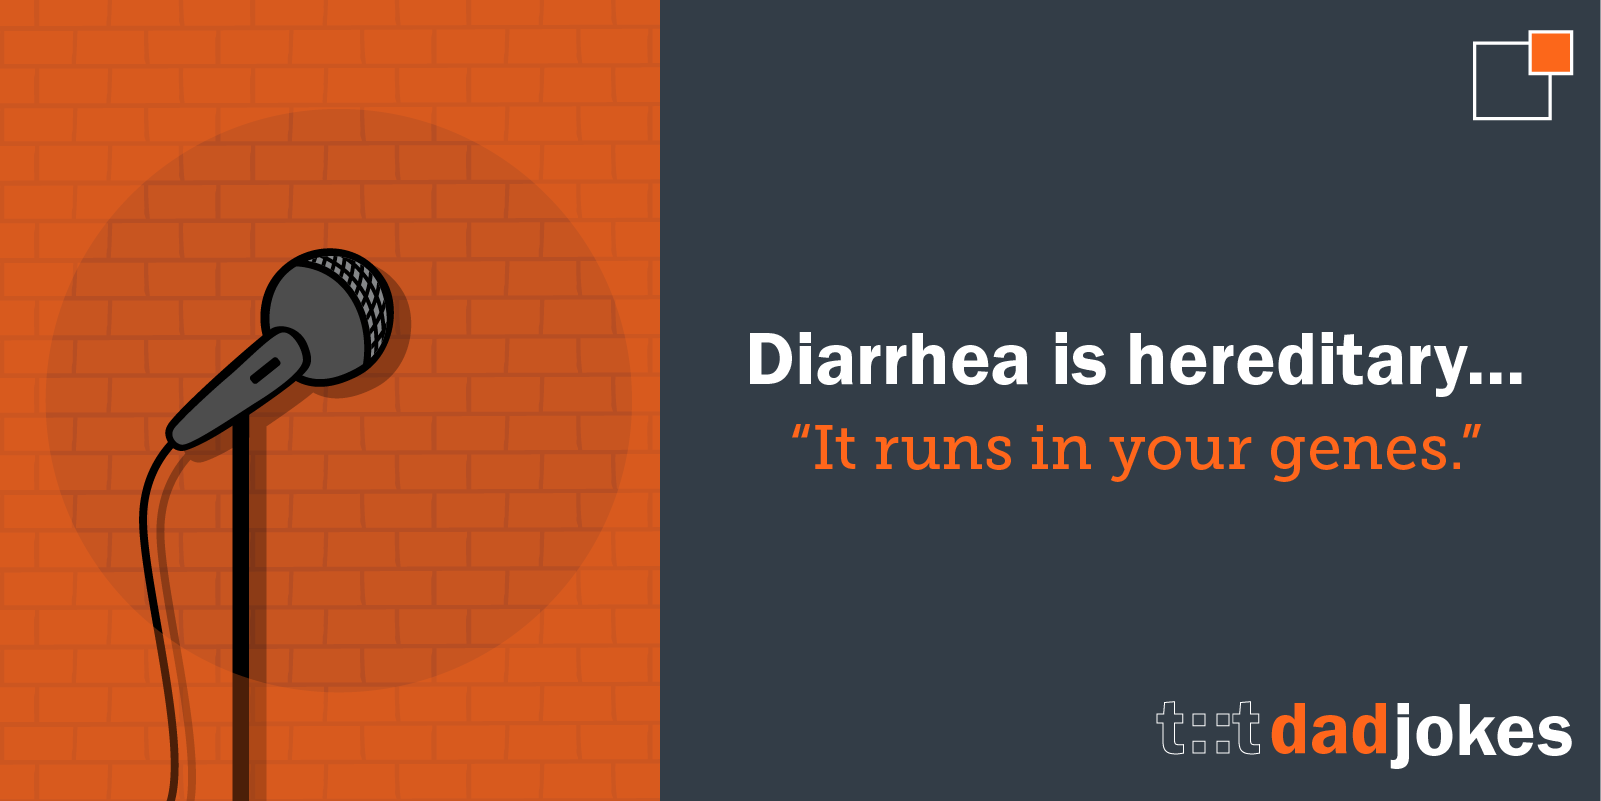 Diarrhea is hereditary... It runs in your jeans.